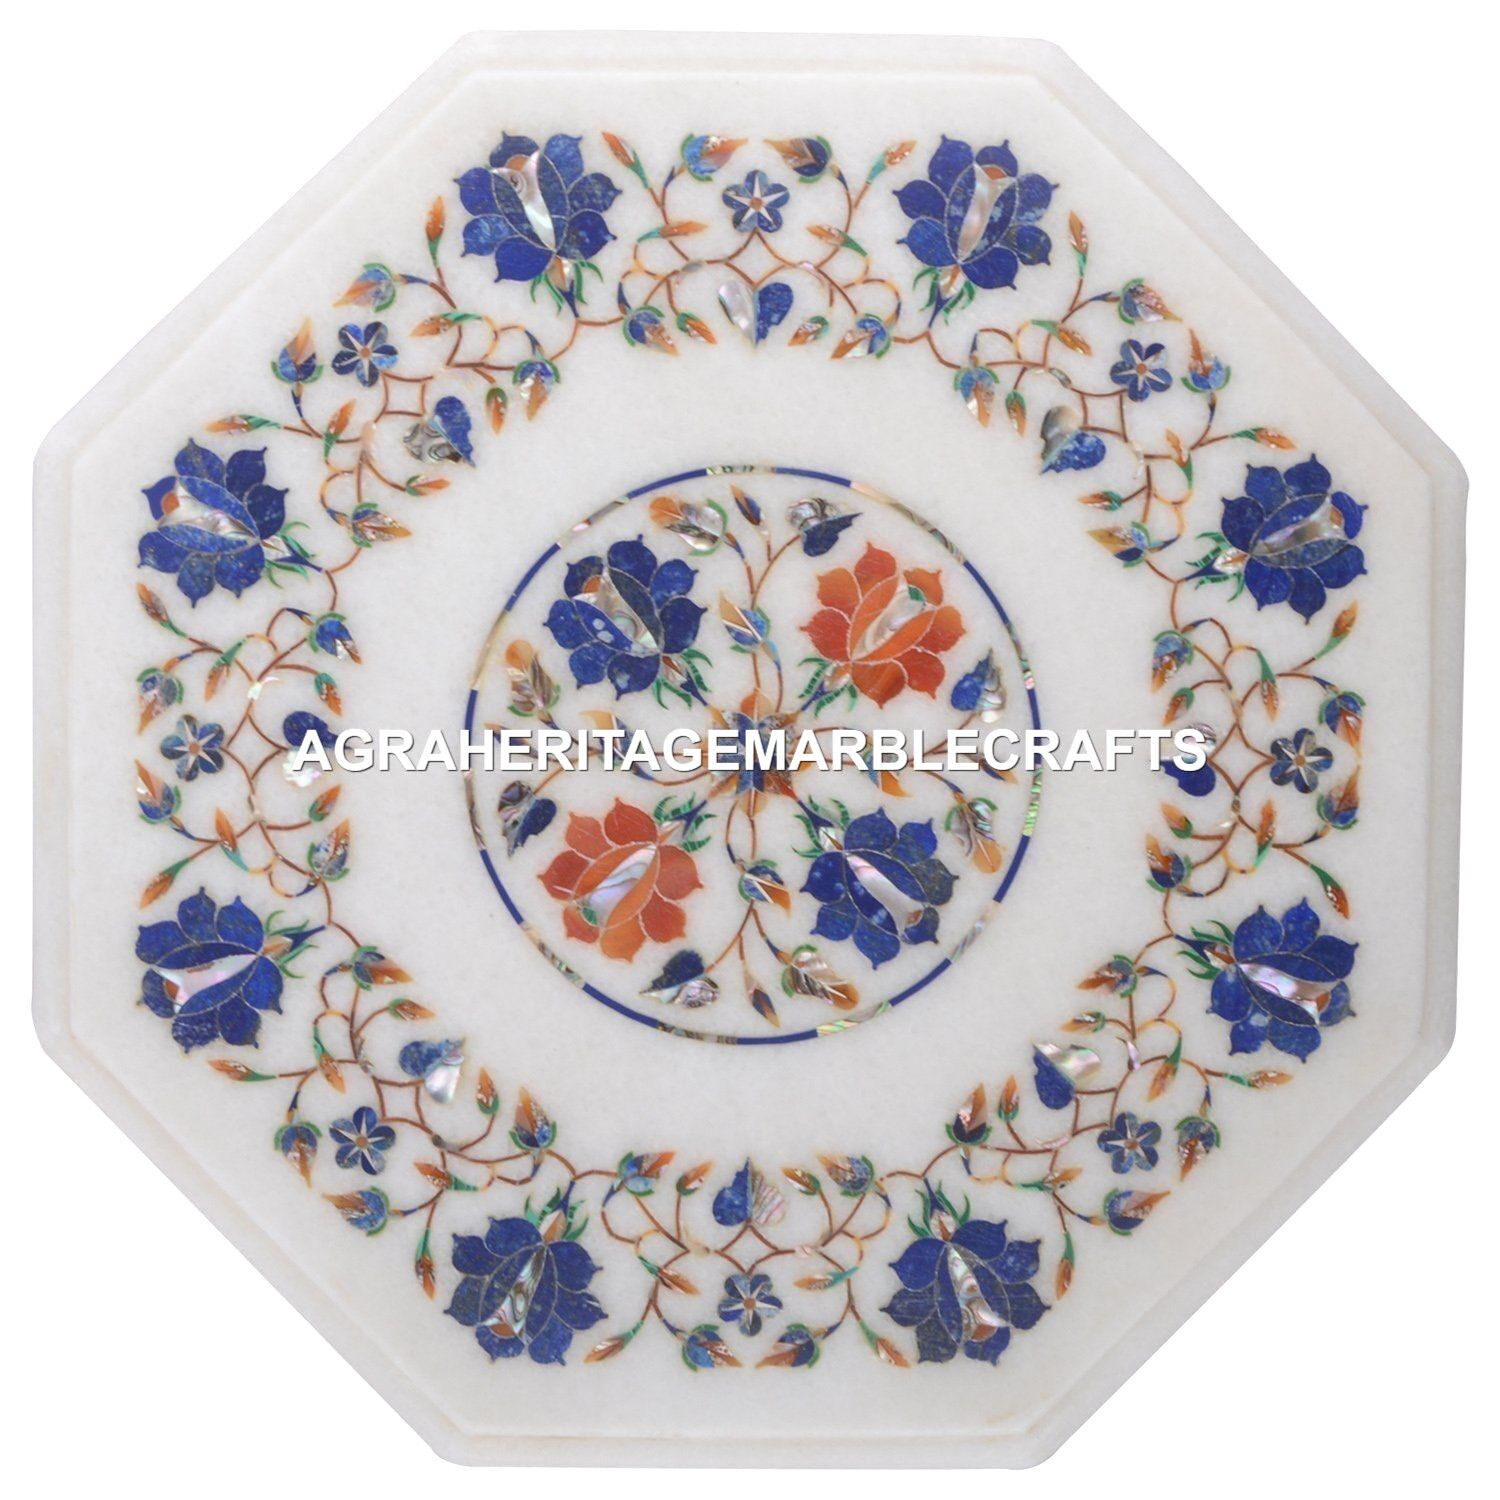 White Marble Coffee Table Top Rare Lapis Lazuli Inlay Marquetry Furniture H2473 - $338.07 - $451.13